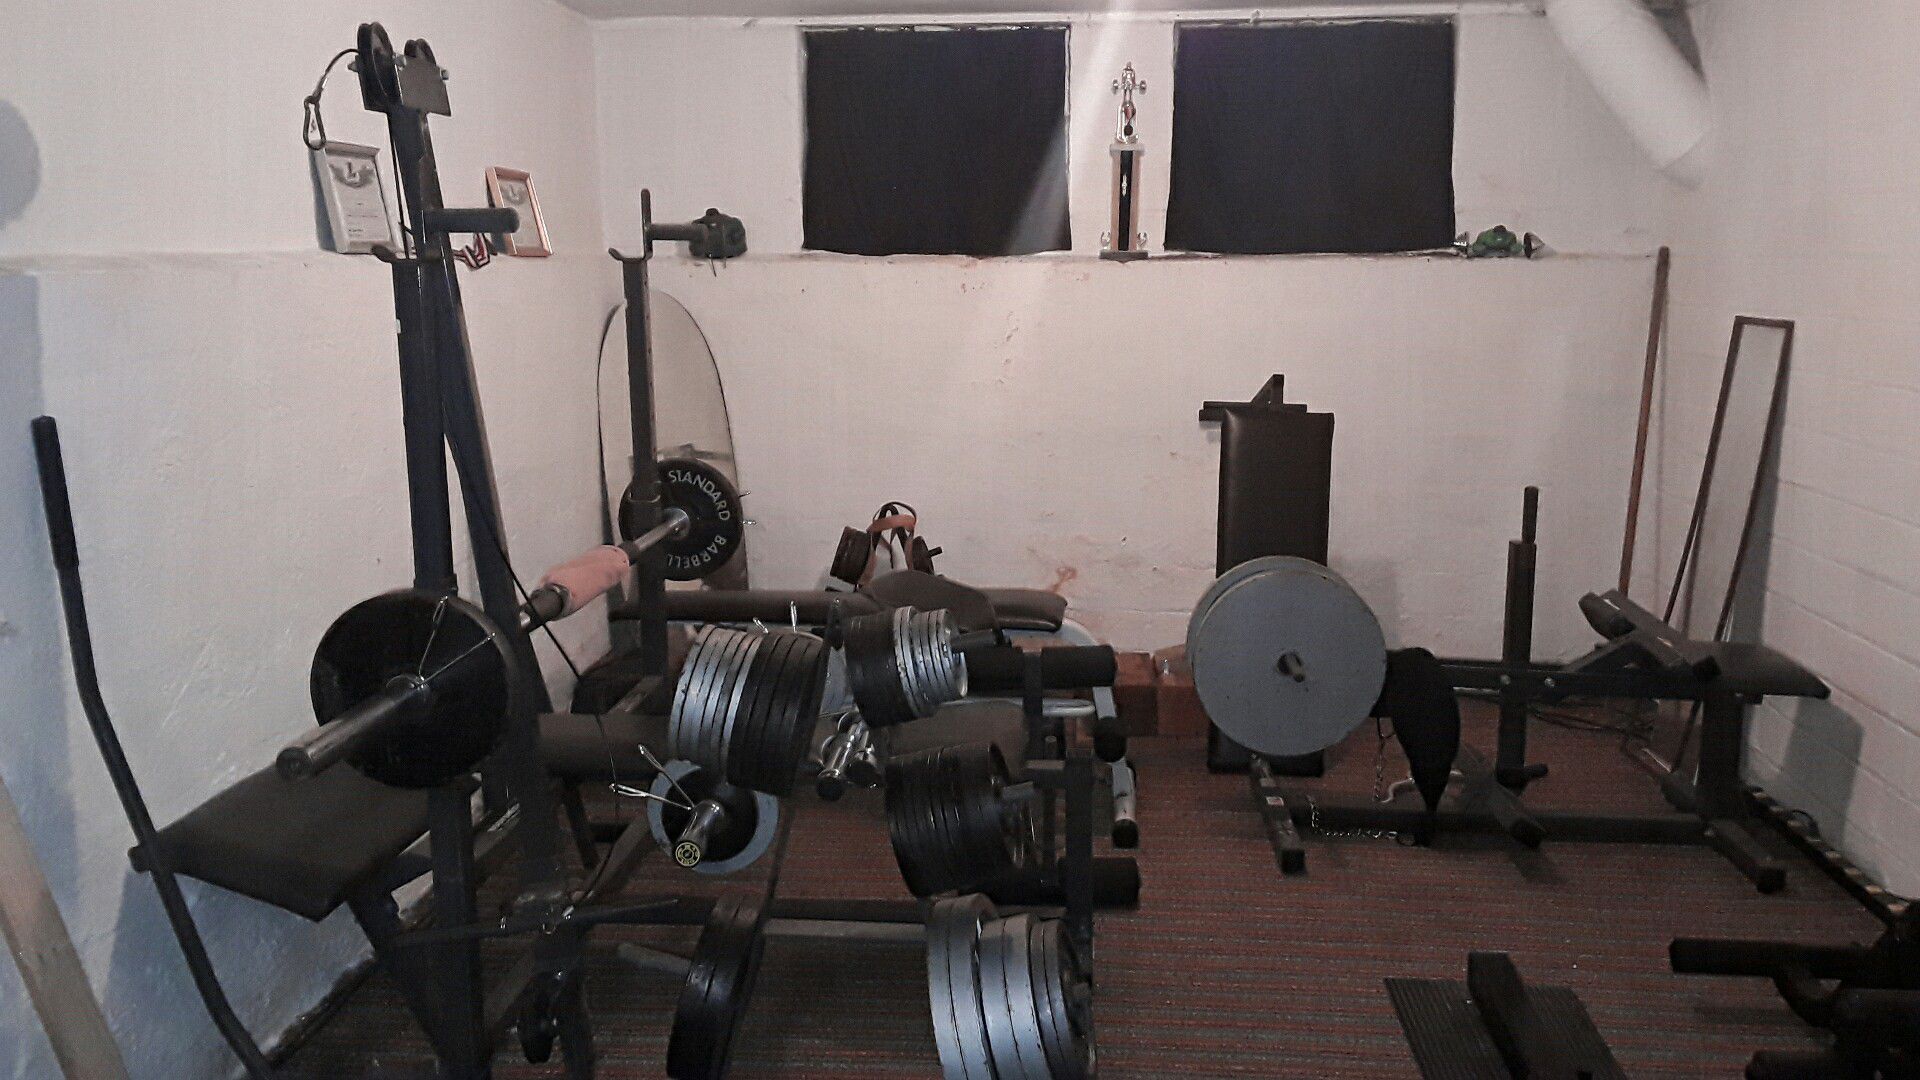 Olympic bench barbell, dumbells, weights & attachments